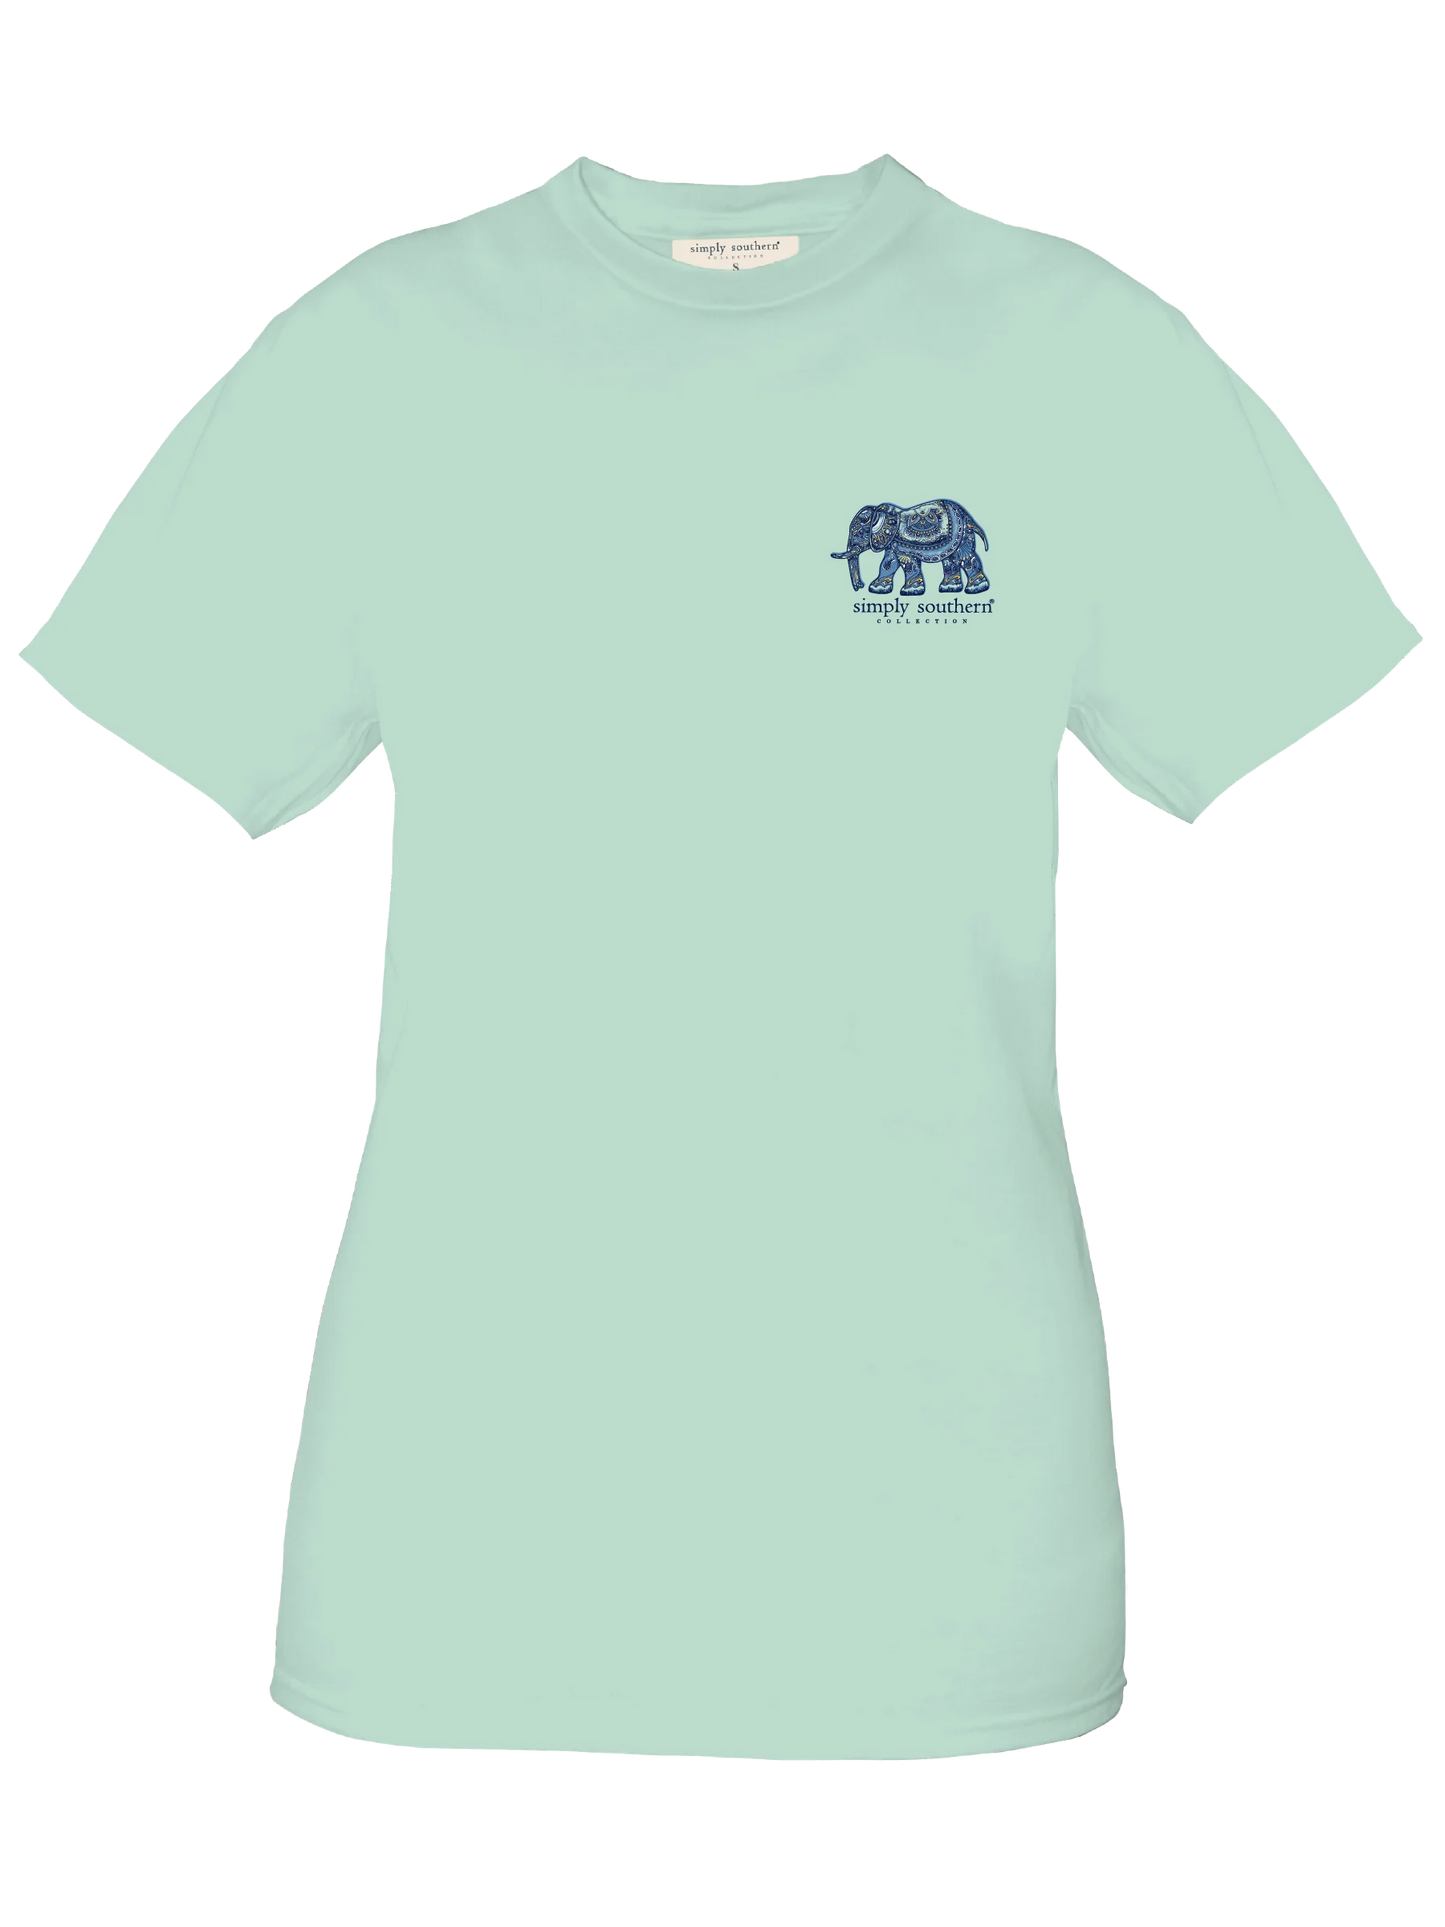 Simply Southern Be Strong & Courageous Elephant T Shirt